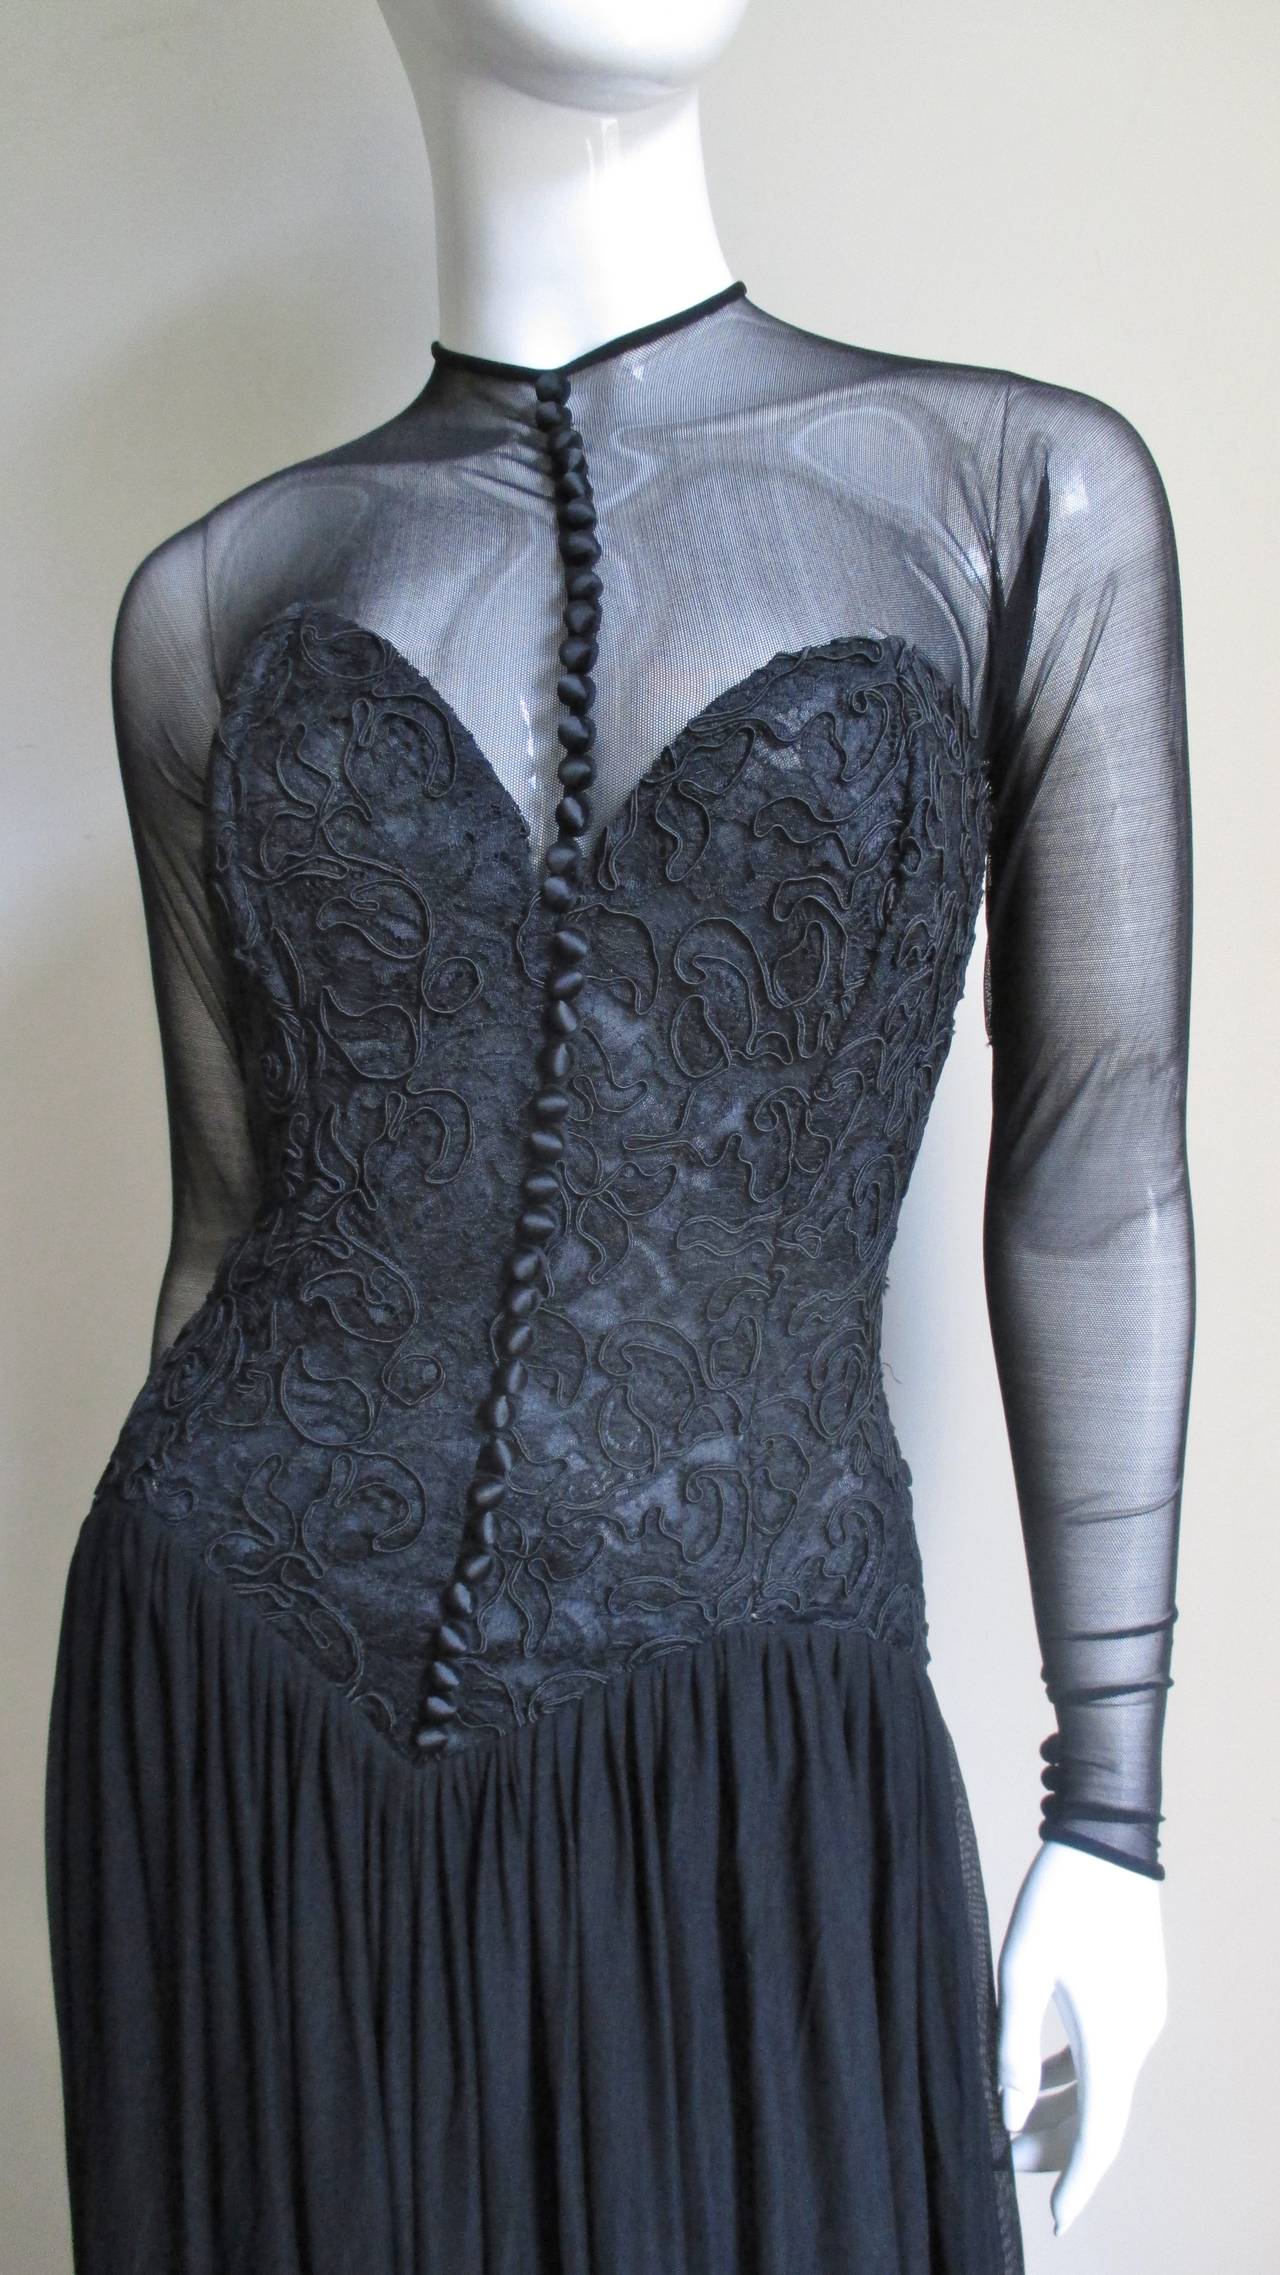 A fabulous black dress from Vicky Tiel.  It has a fitted boned bustier bodice with a dropped V waist in an intricate corded lace pattern with silk buttons and loops onto which a full silk mesh skirt is gathered.  It is striking with sheer sleeves,